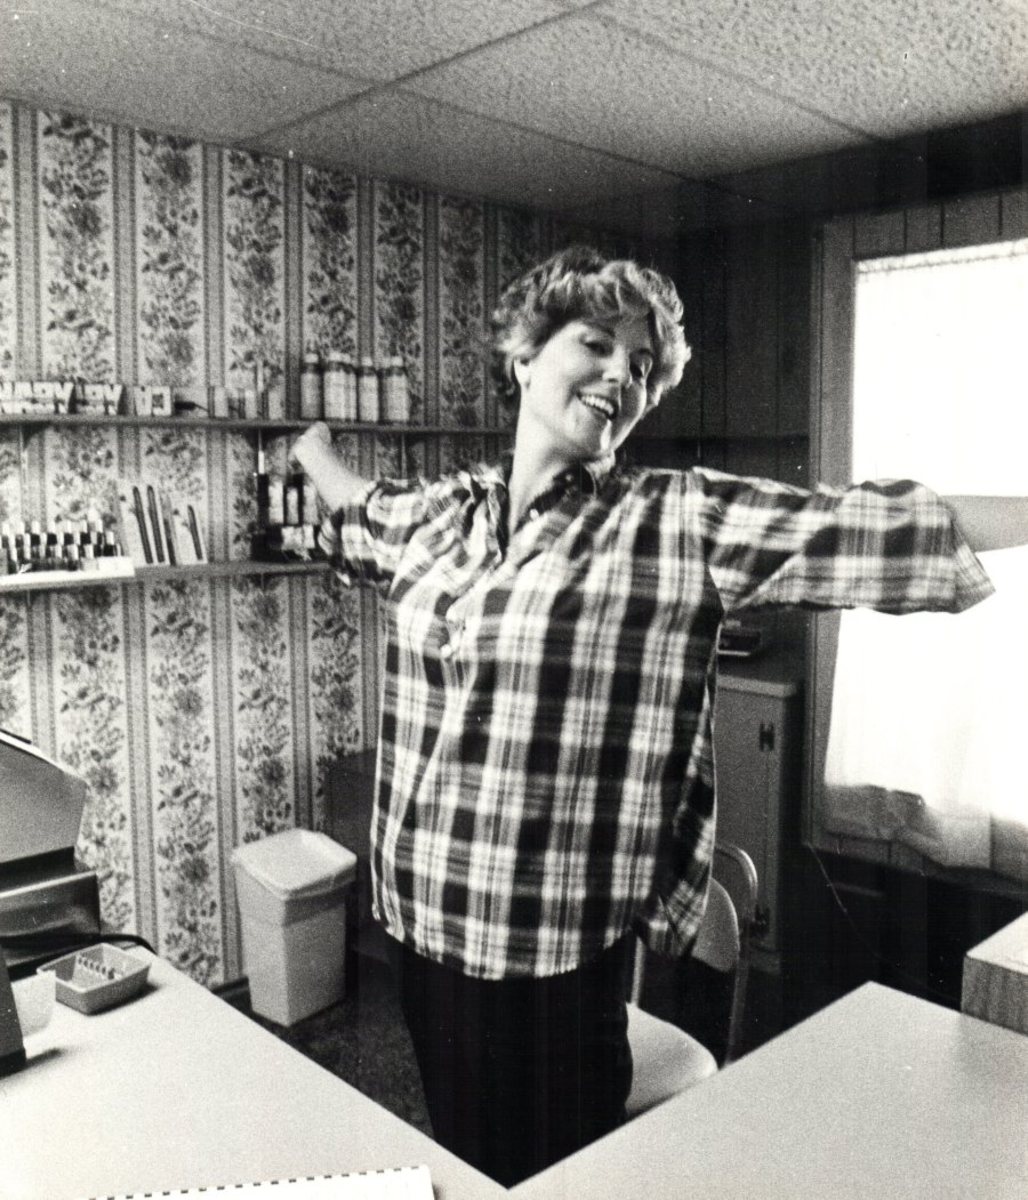 Mary Freshwater in the late 1980s at The Pamper Room, her hair salon in Jacksonville, North Carolina.